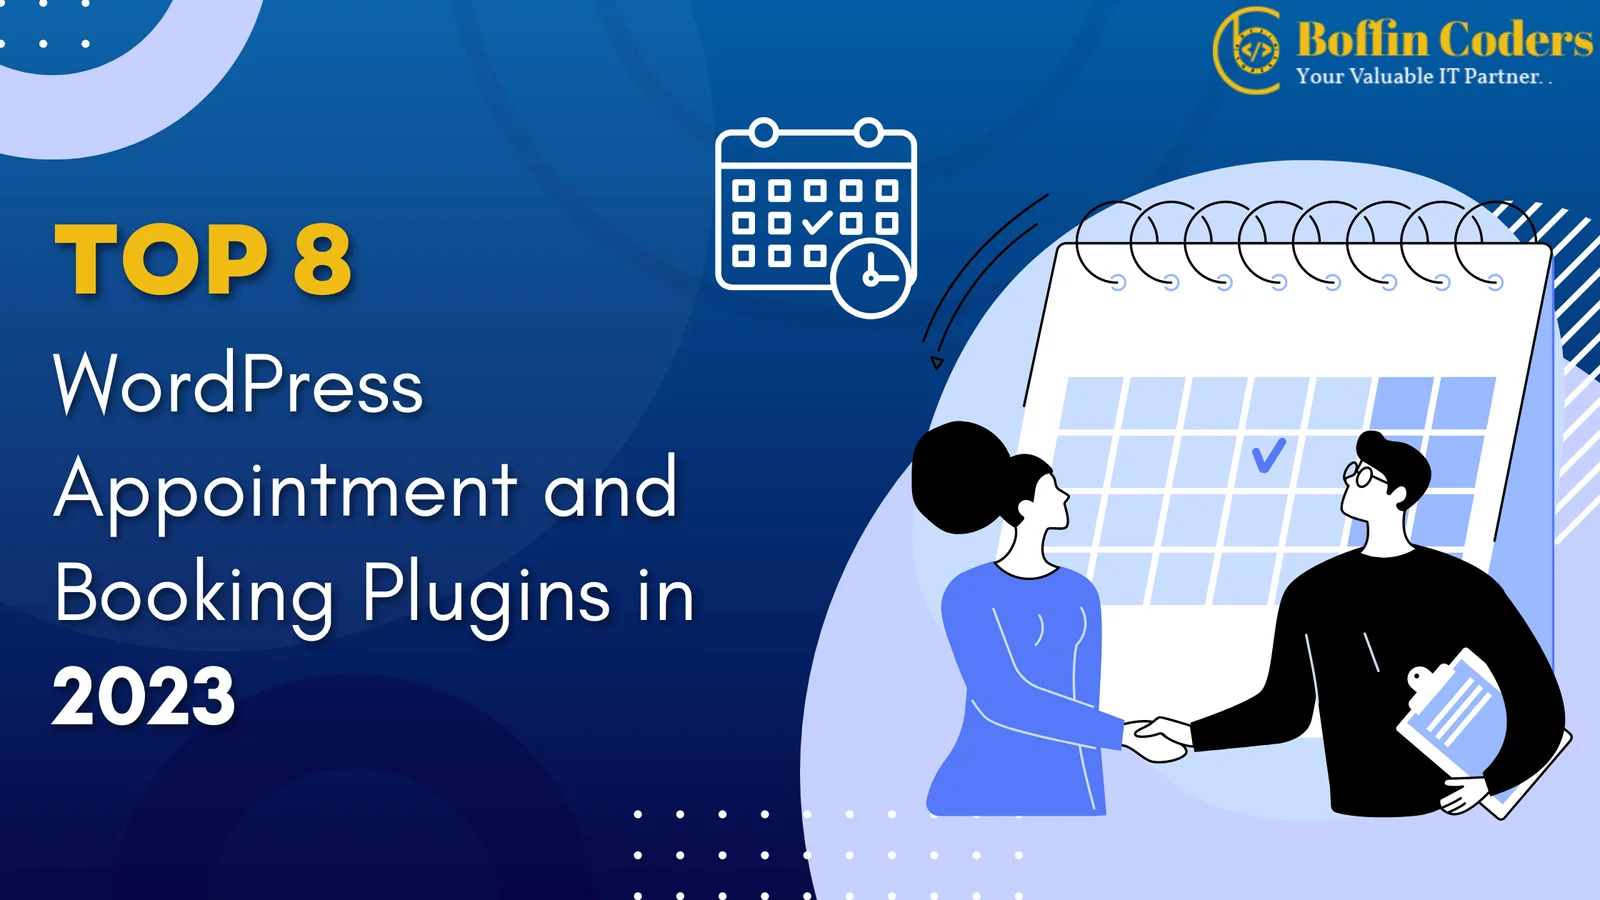 Top 8 WordPress Appointment and Booking Plugins in 2023